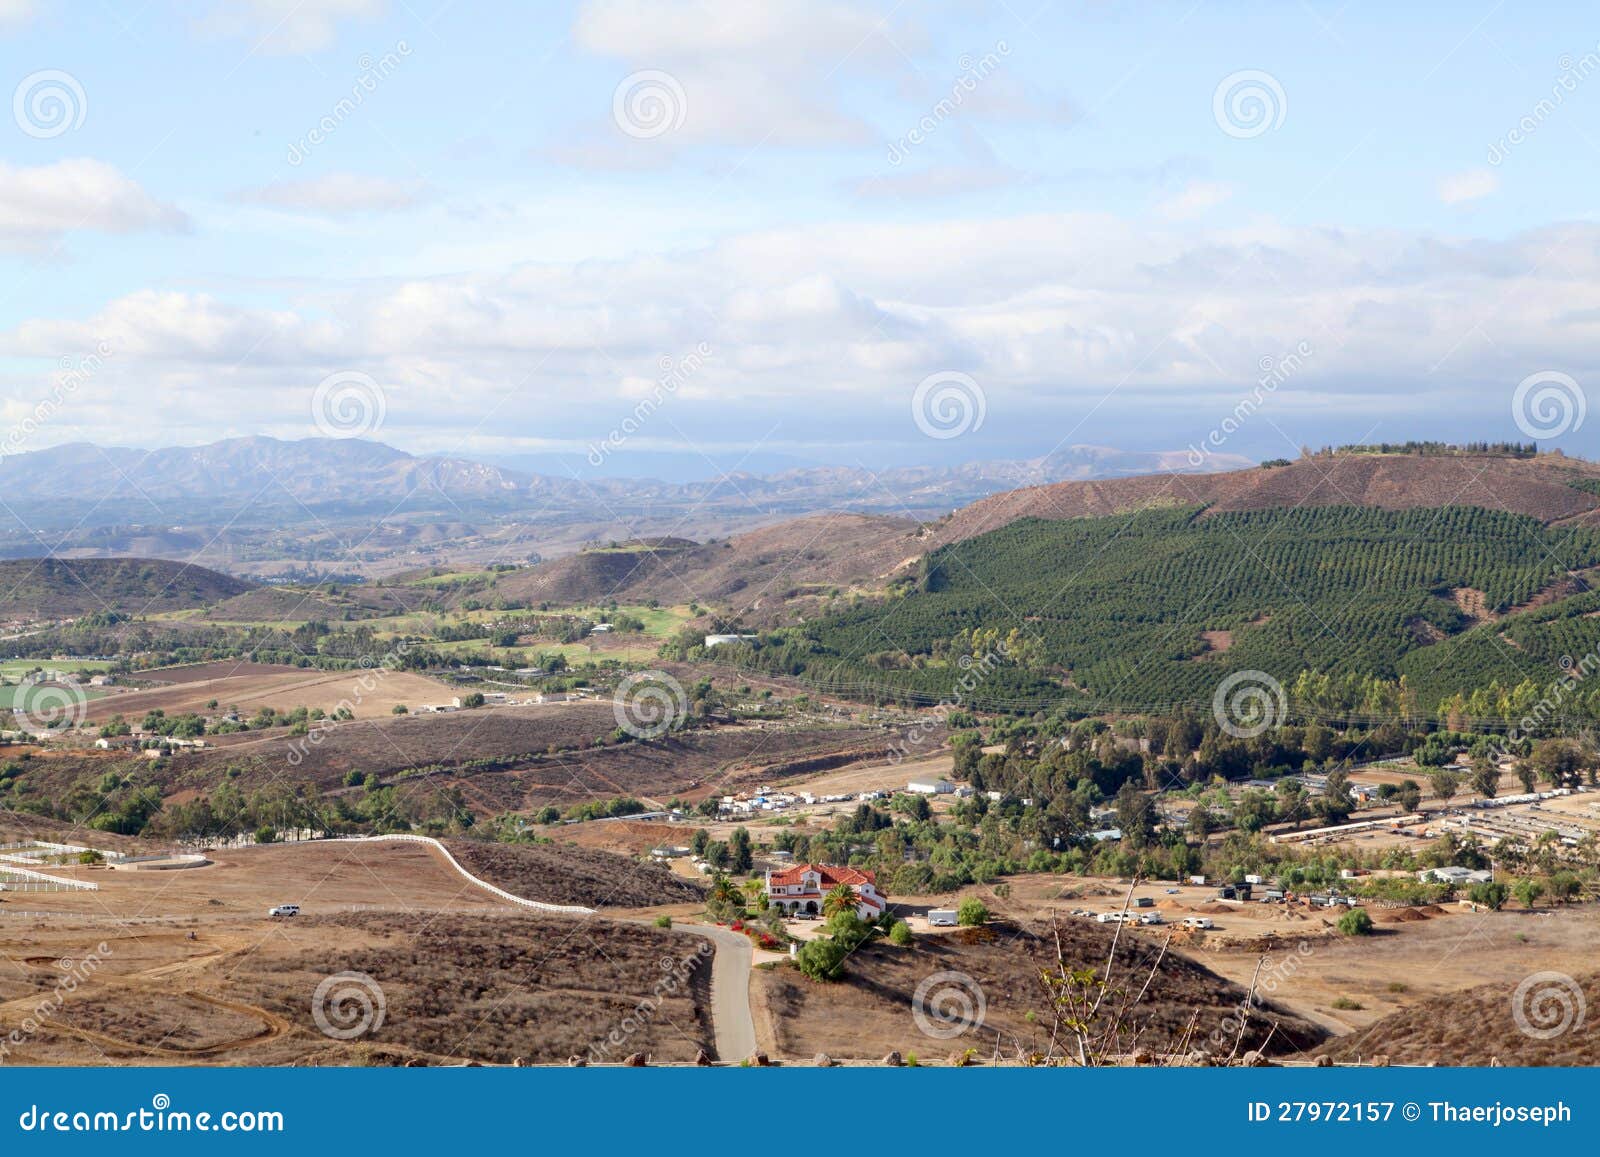 Simi Valley Landscape Royalty Free Stock Photography - Image: 27972157